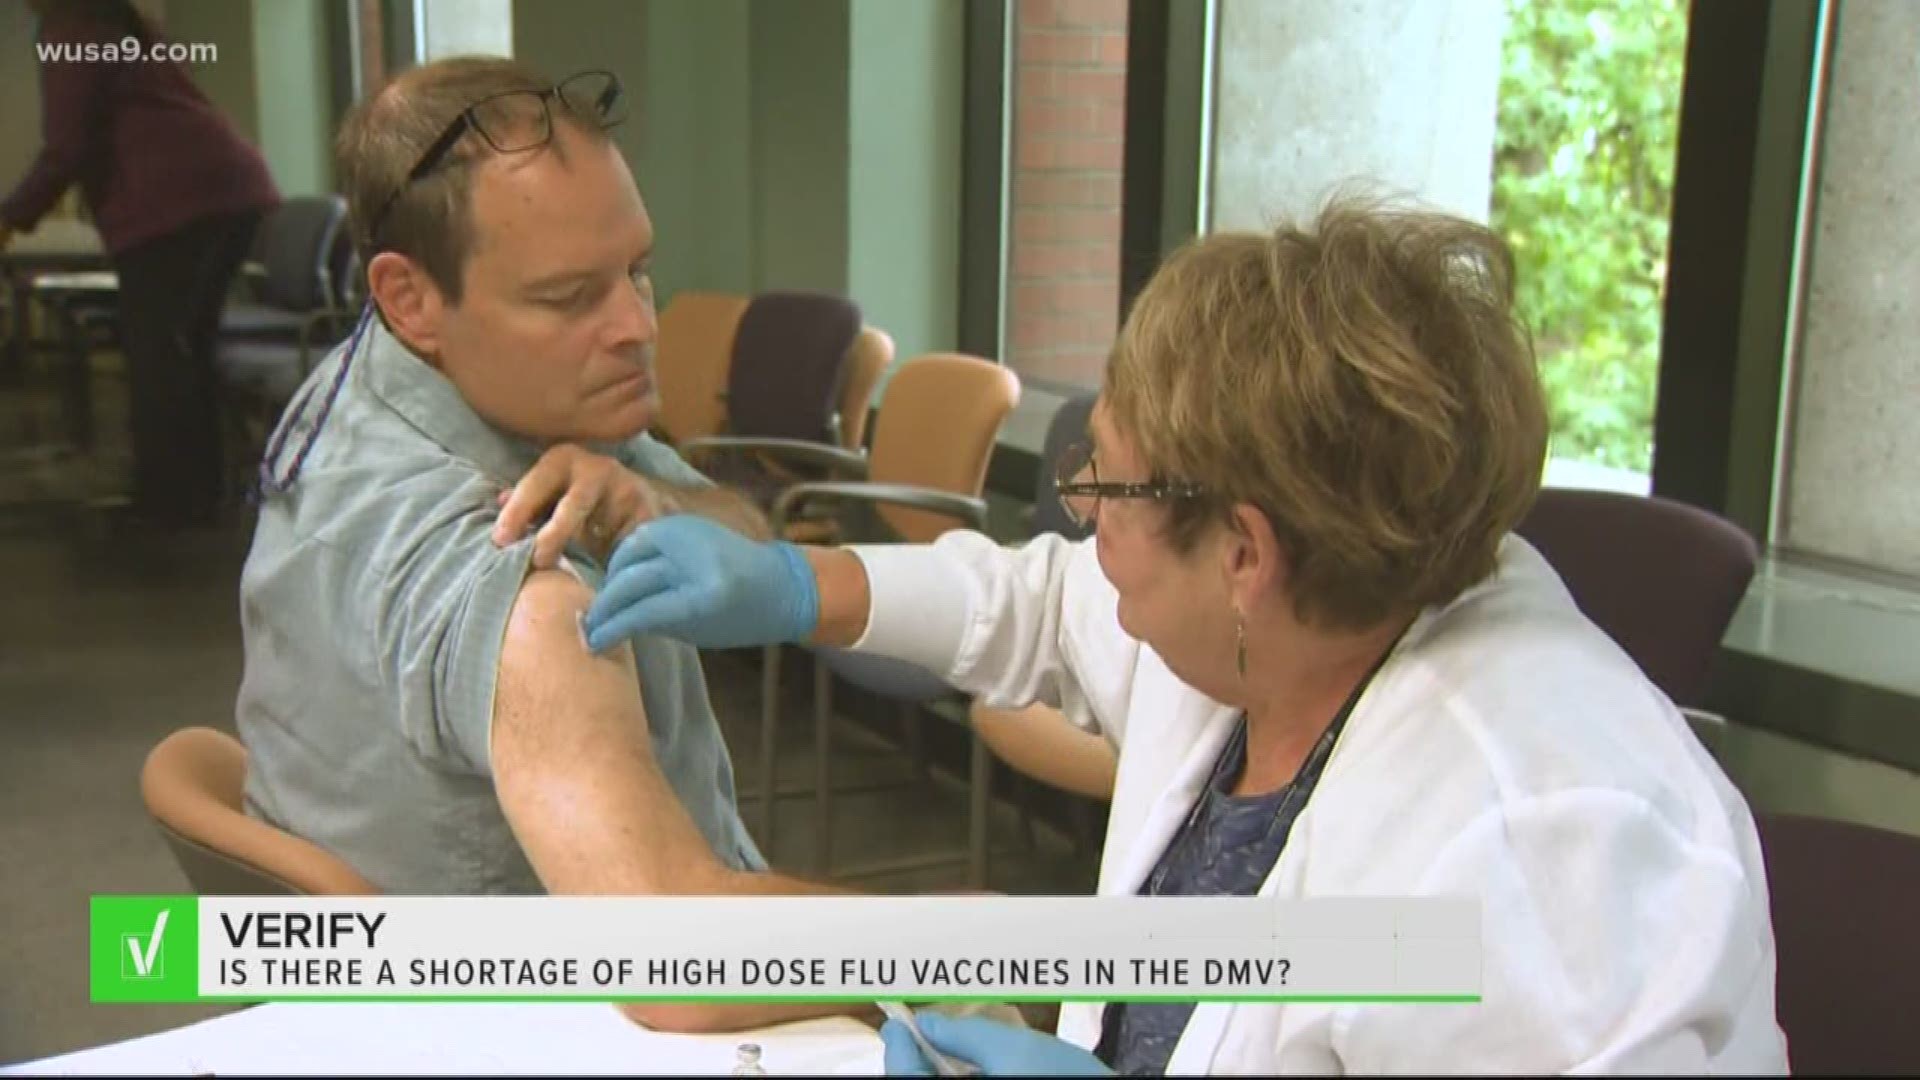 Six viewers from across the DMV emailed the Verify team saying they couldn't find a high dose flu vaccine anywhere.